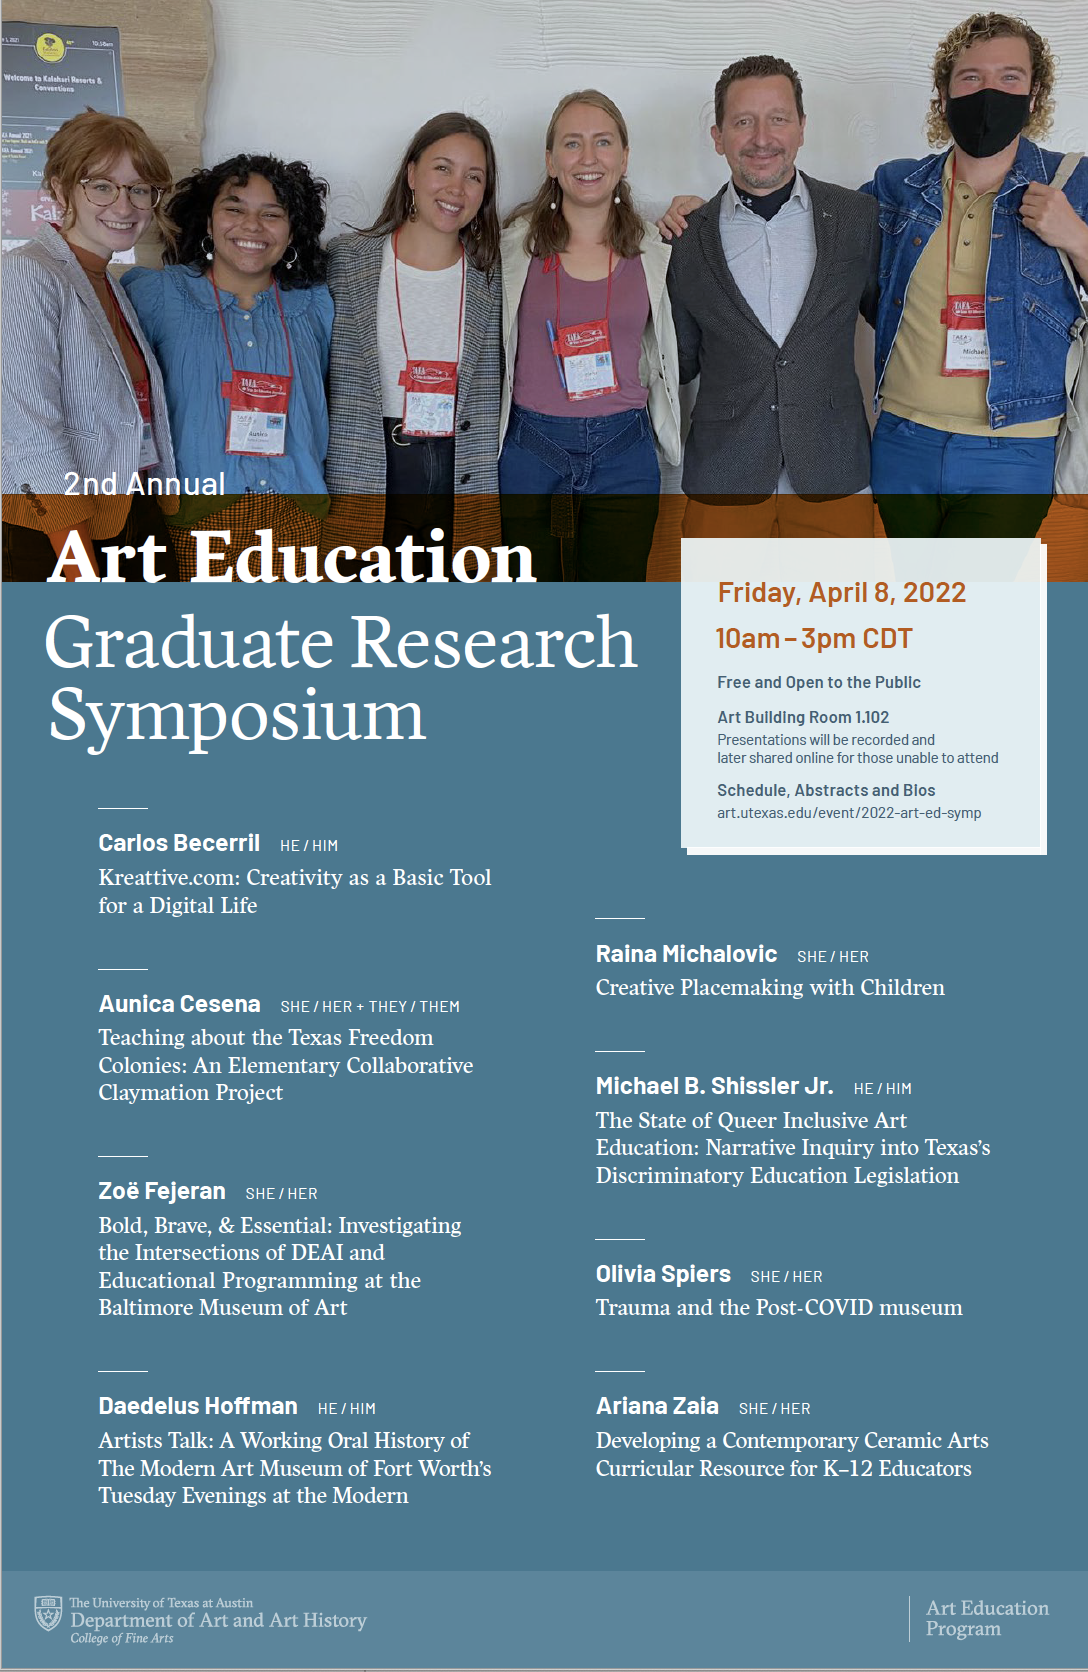 Poster for Second annual Art Education Graduate Research Symposium, Friday, April 8, 2022 from 10 a.m. to 3 p.m. in the Art Building Room 1.102 Featuring Carlos Becerril, Aunica Cesena, Zoe Fejeran, Daedalus Hoffman, Raina Michalovic, Michael B. Chiseler Jr., Olivia Spiers, and Ariana Zaia